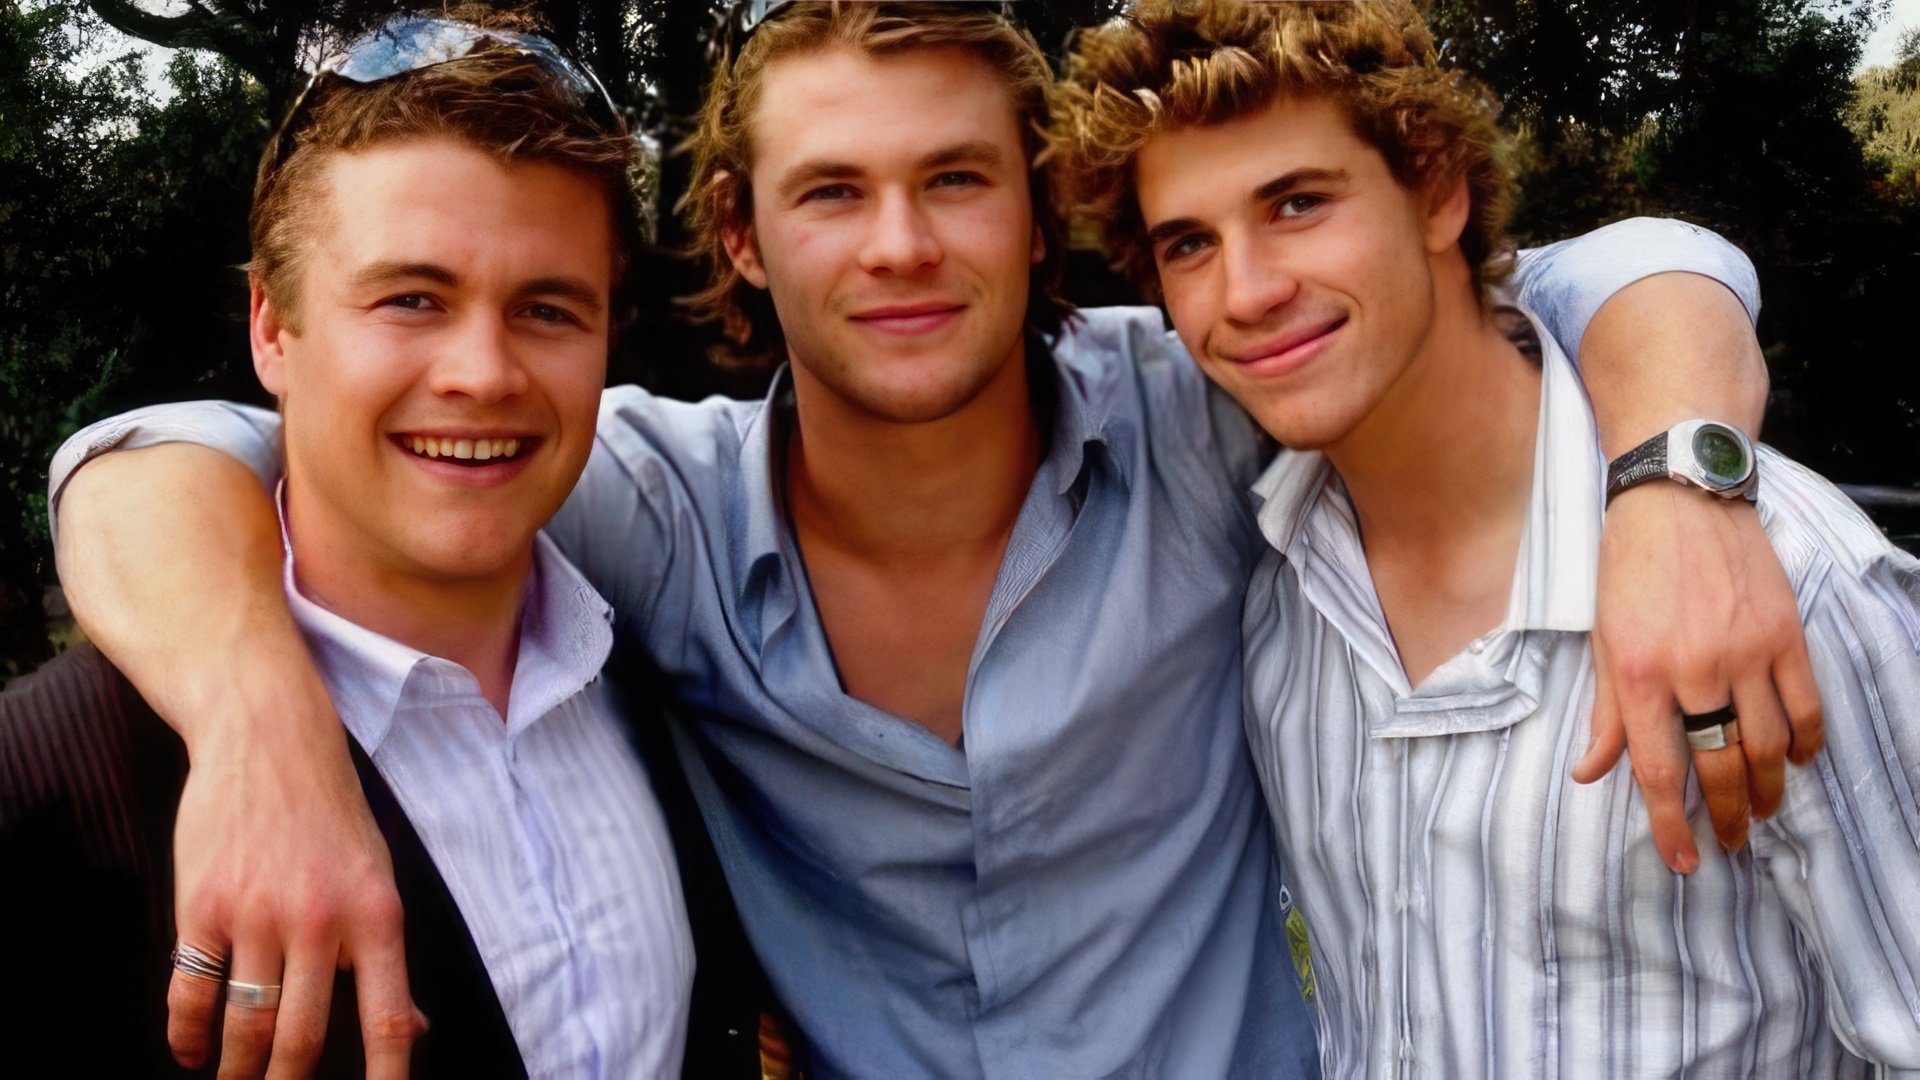 Hemsworth’s Brothers: Luke, Chris, and Liam (from left to right)